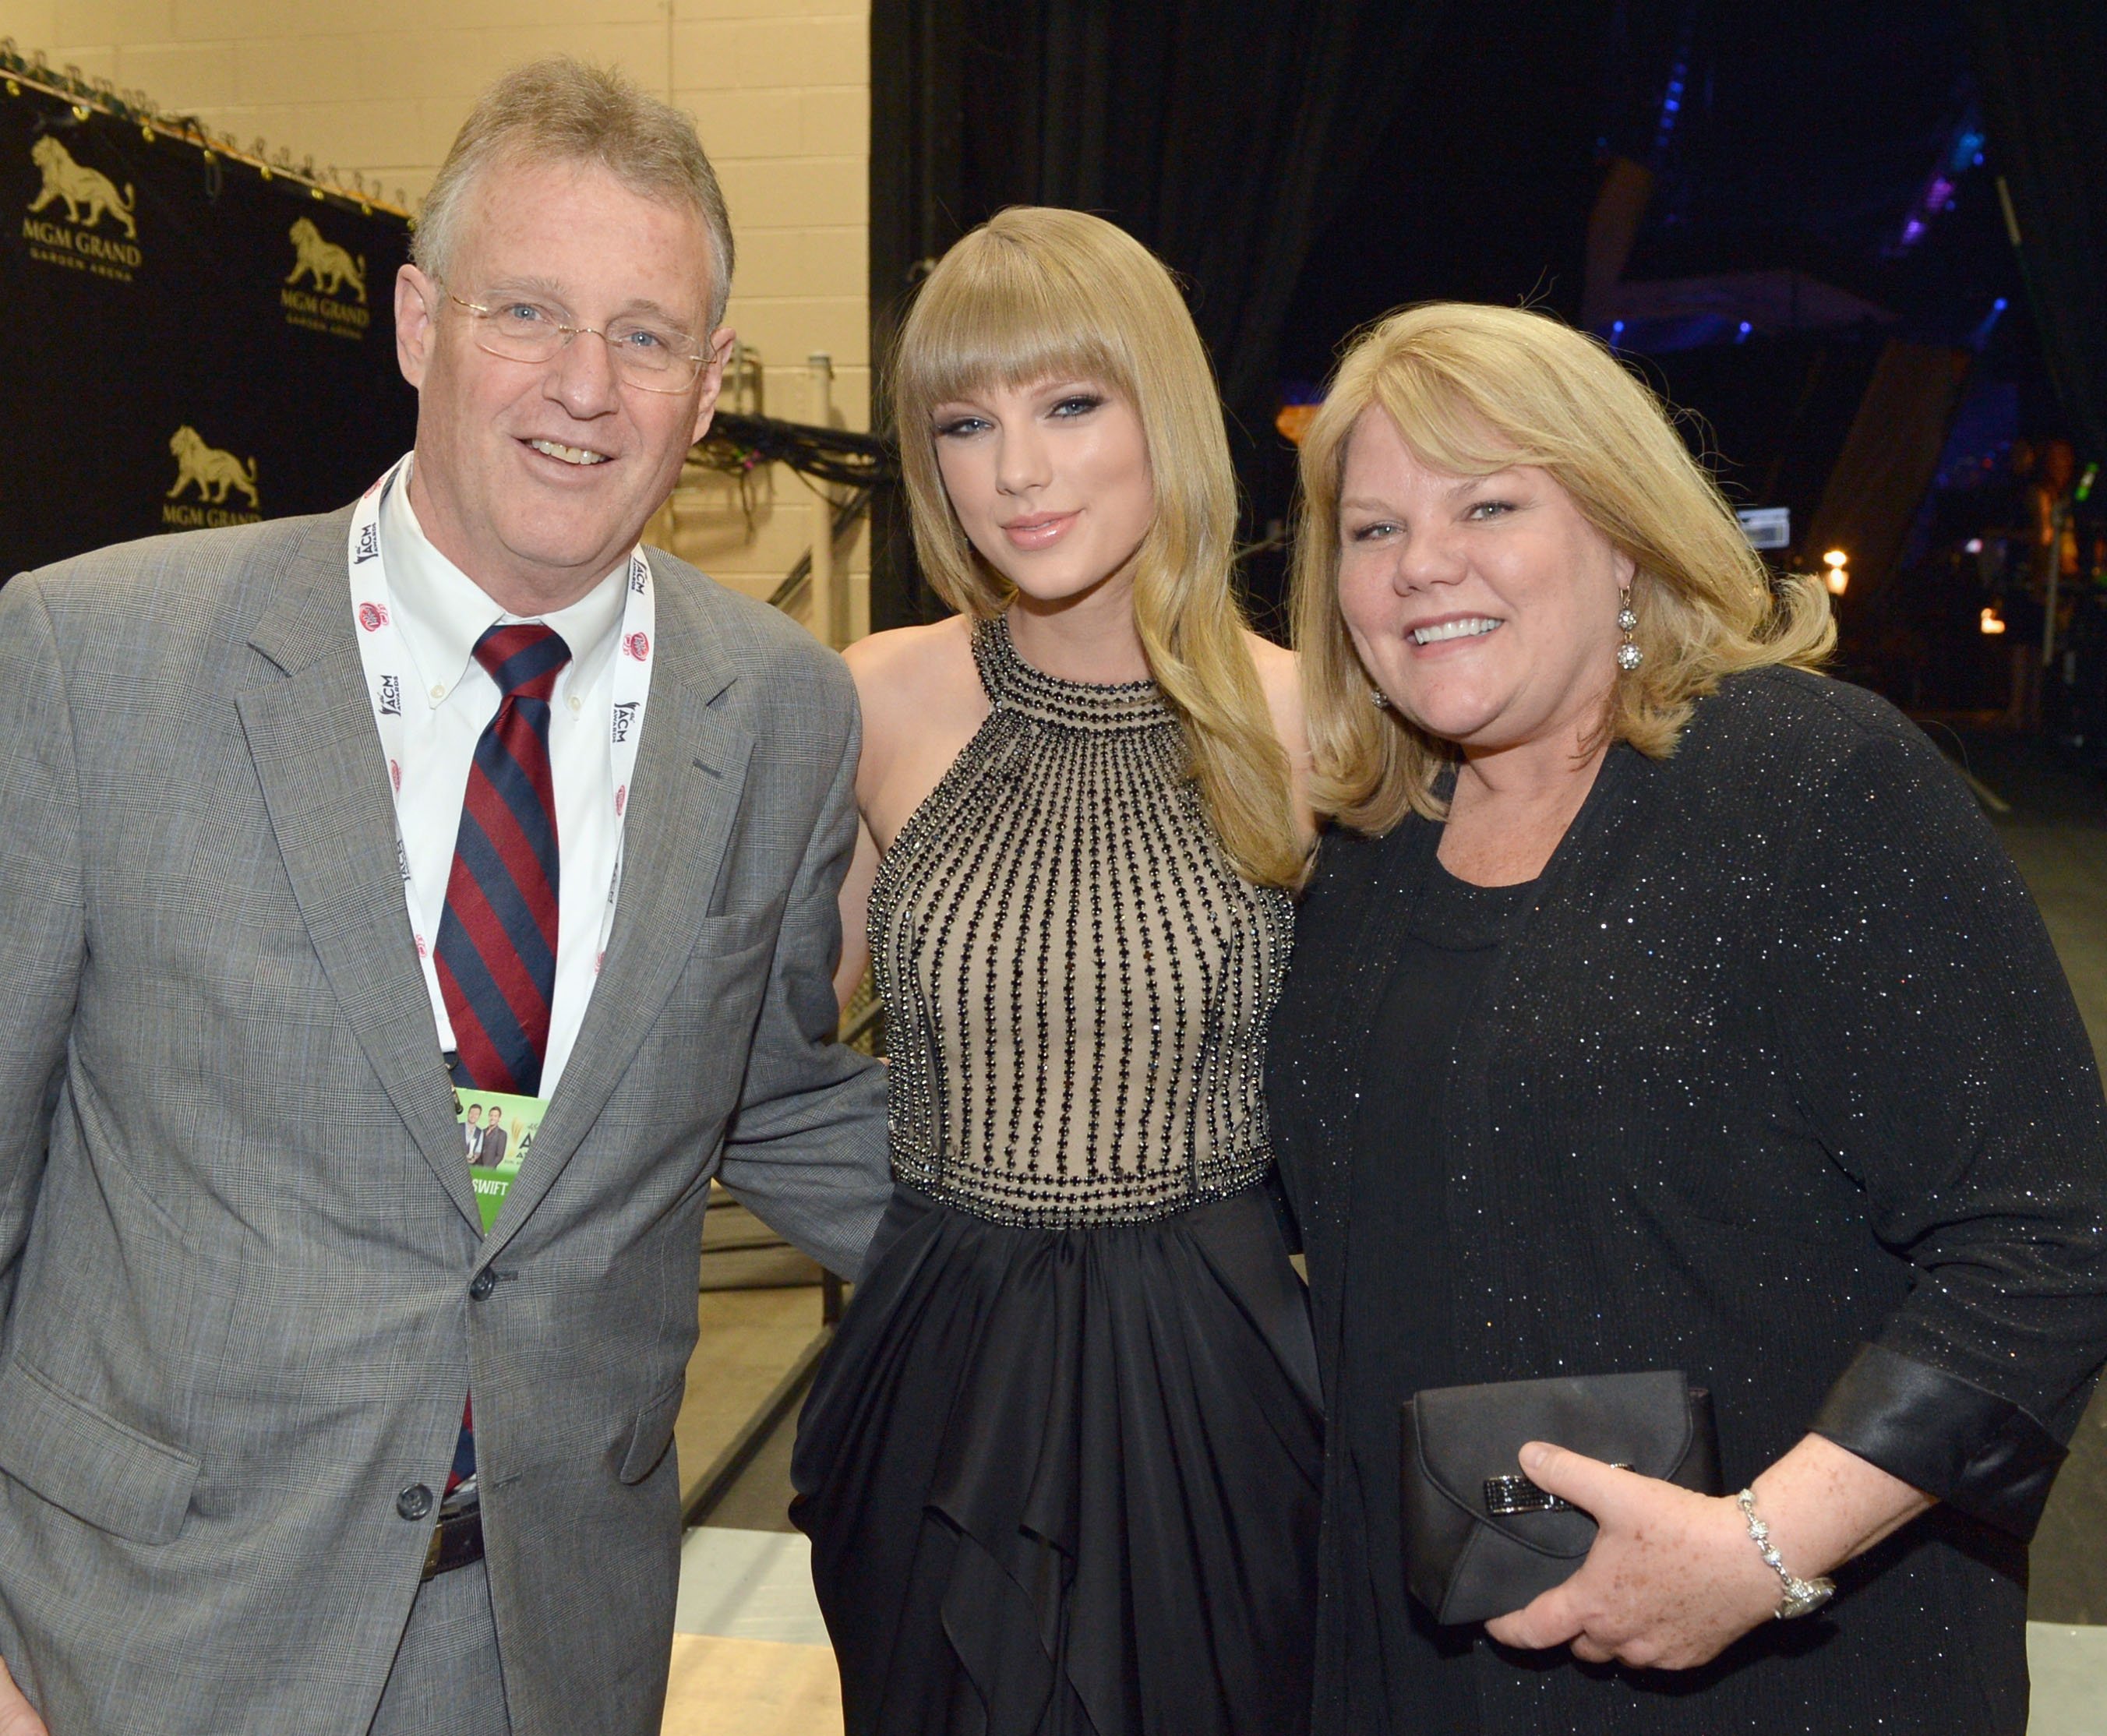 Scott Swift, Taylor Swift, and Andrea Swift during the 48th Annual Academy of Country Music Awards at the MGM Grand Garden Arena on April 7, 2013, in Las Vegas, Nevada. | Source: Getty Images